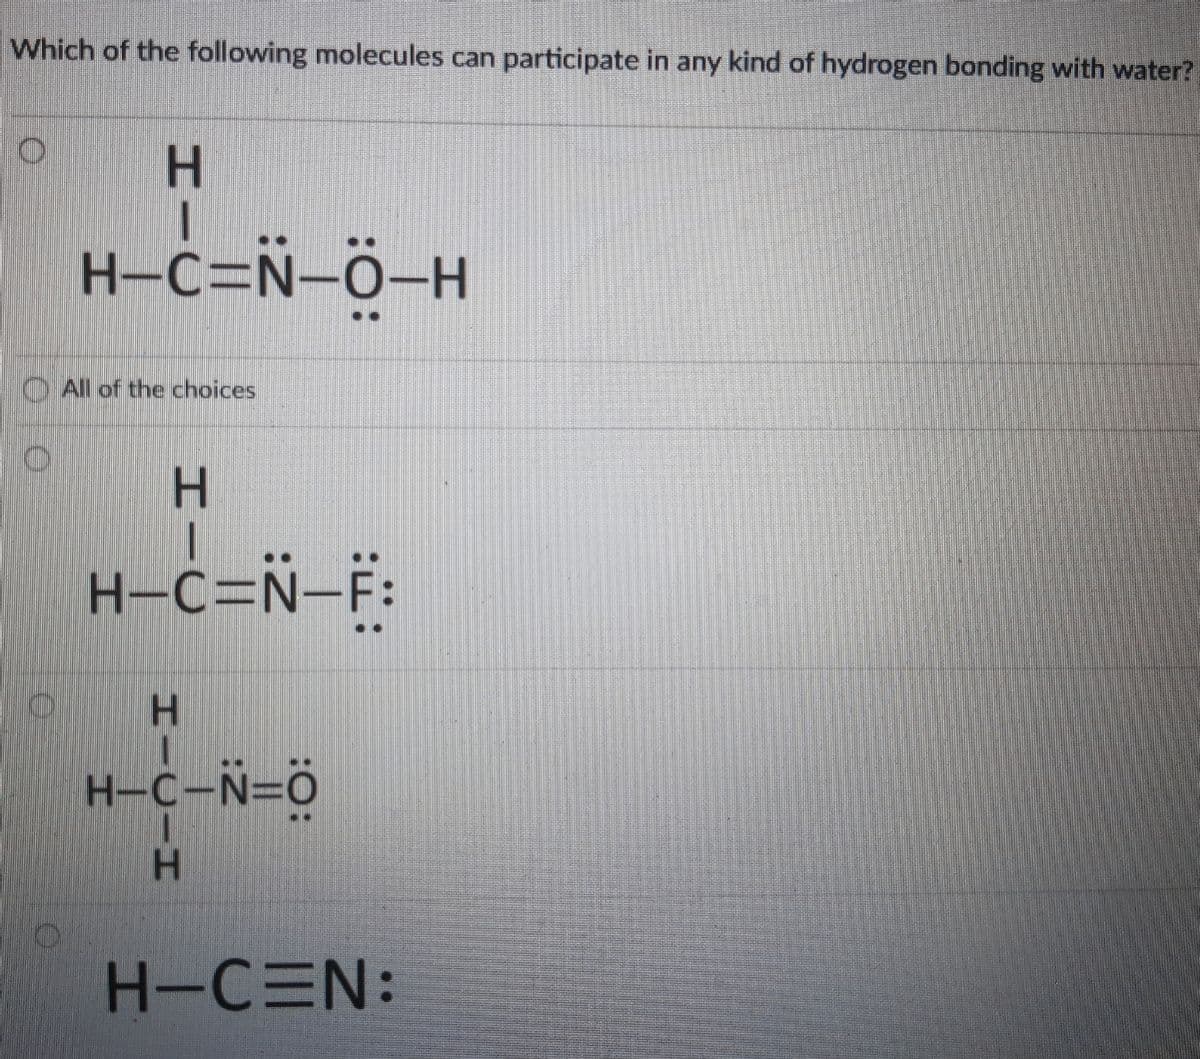 Which of the following molecules can participate in any kind of hydrogen bonding with water?
H.
H-c=Ñ-ö-H
O All of the choices
H.
H-c=Ñ=F:
H-C-N=ö
H-CEN:
HICIH
